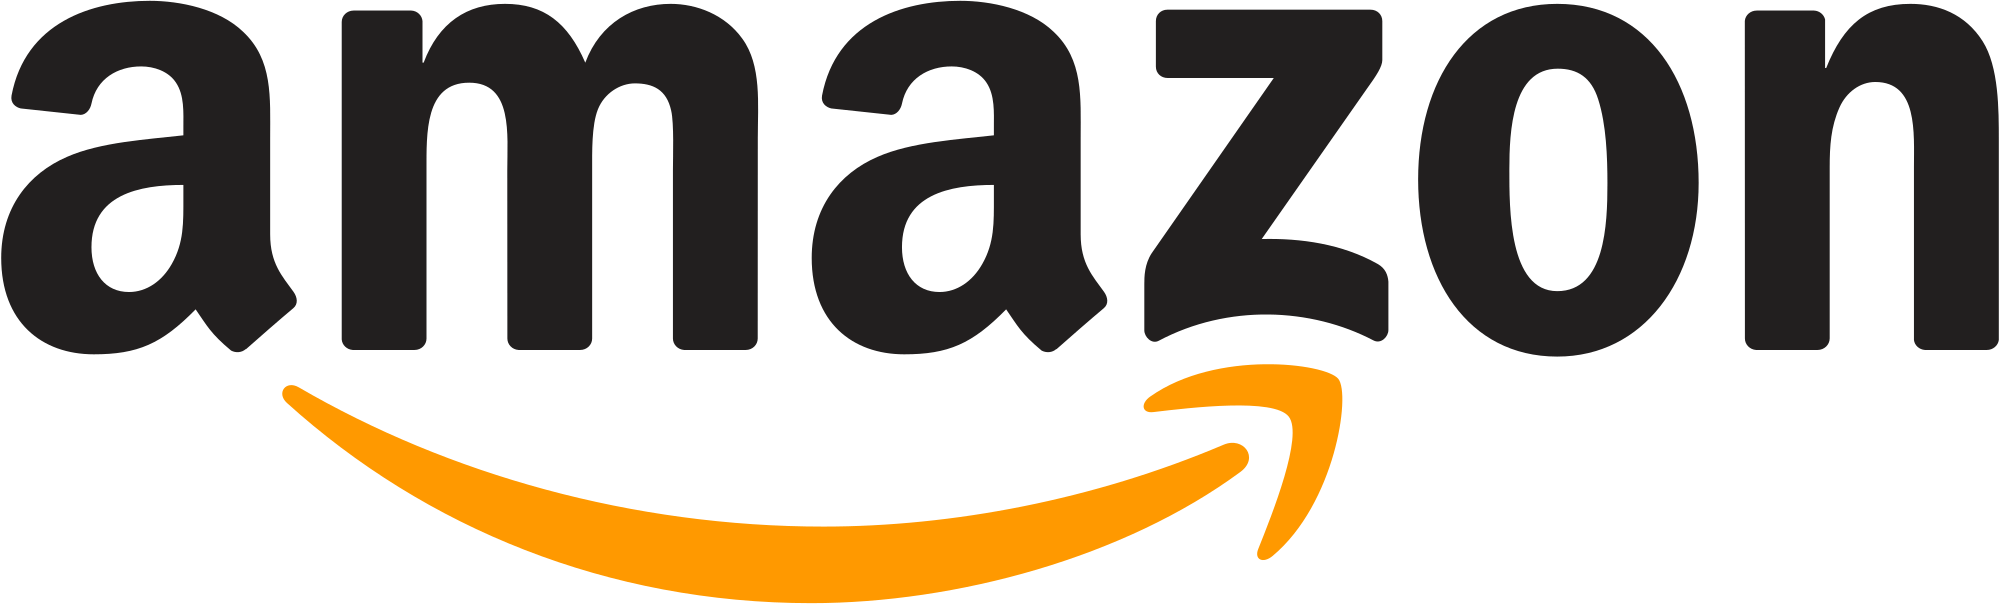 FBA Amazon Logo - How to Find Good Amazon FBA Sourcing Agent in China?